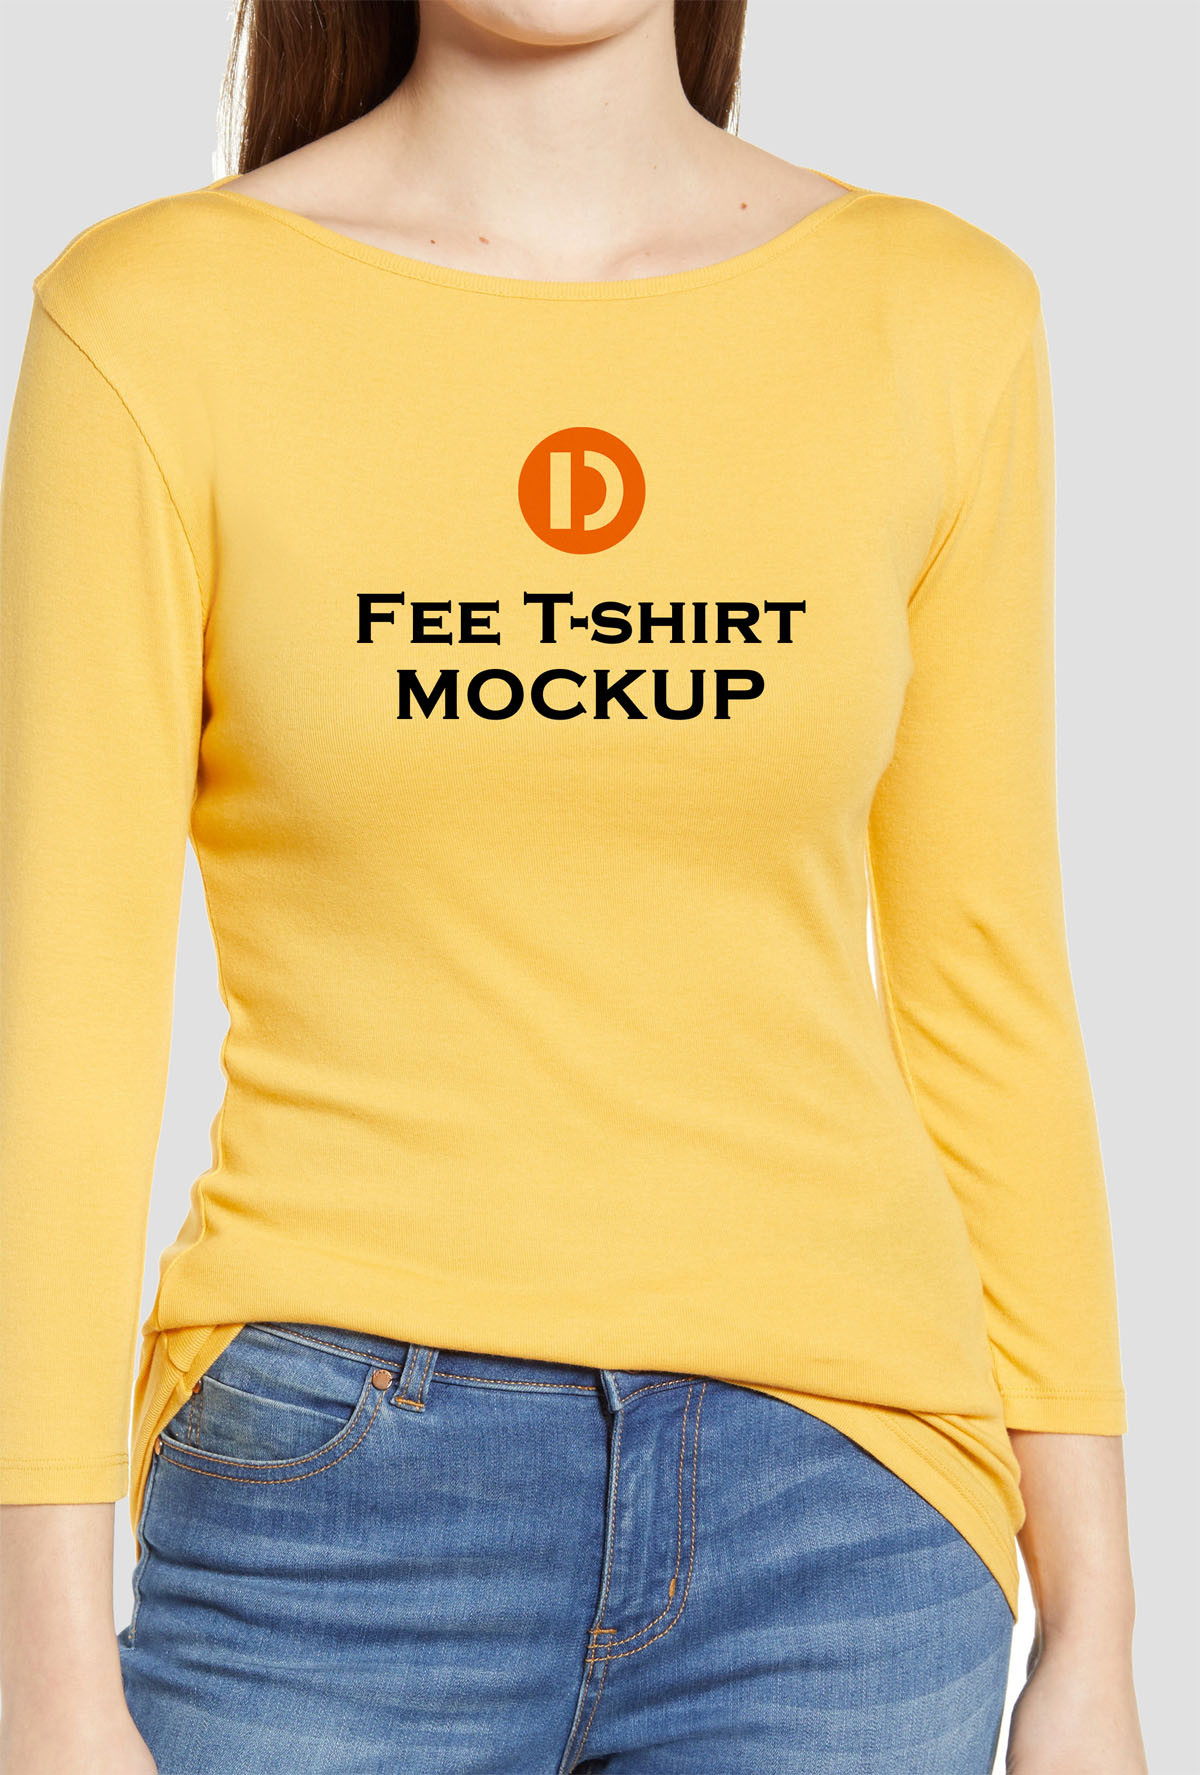 Download Free Woman T-Shirt Mockup - Find the Perfect Creative ...